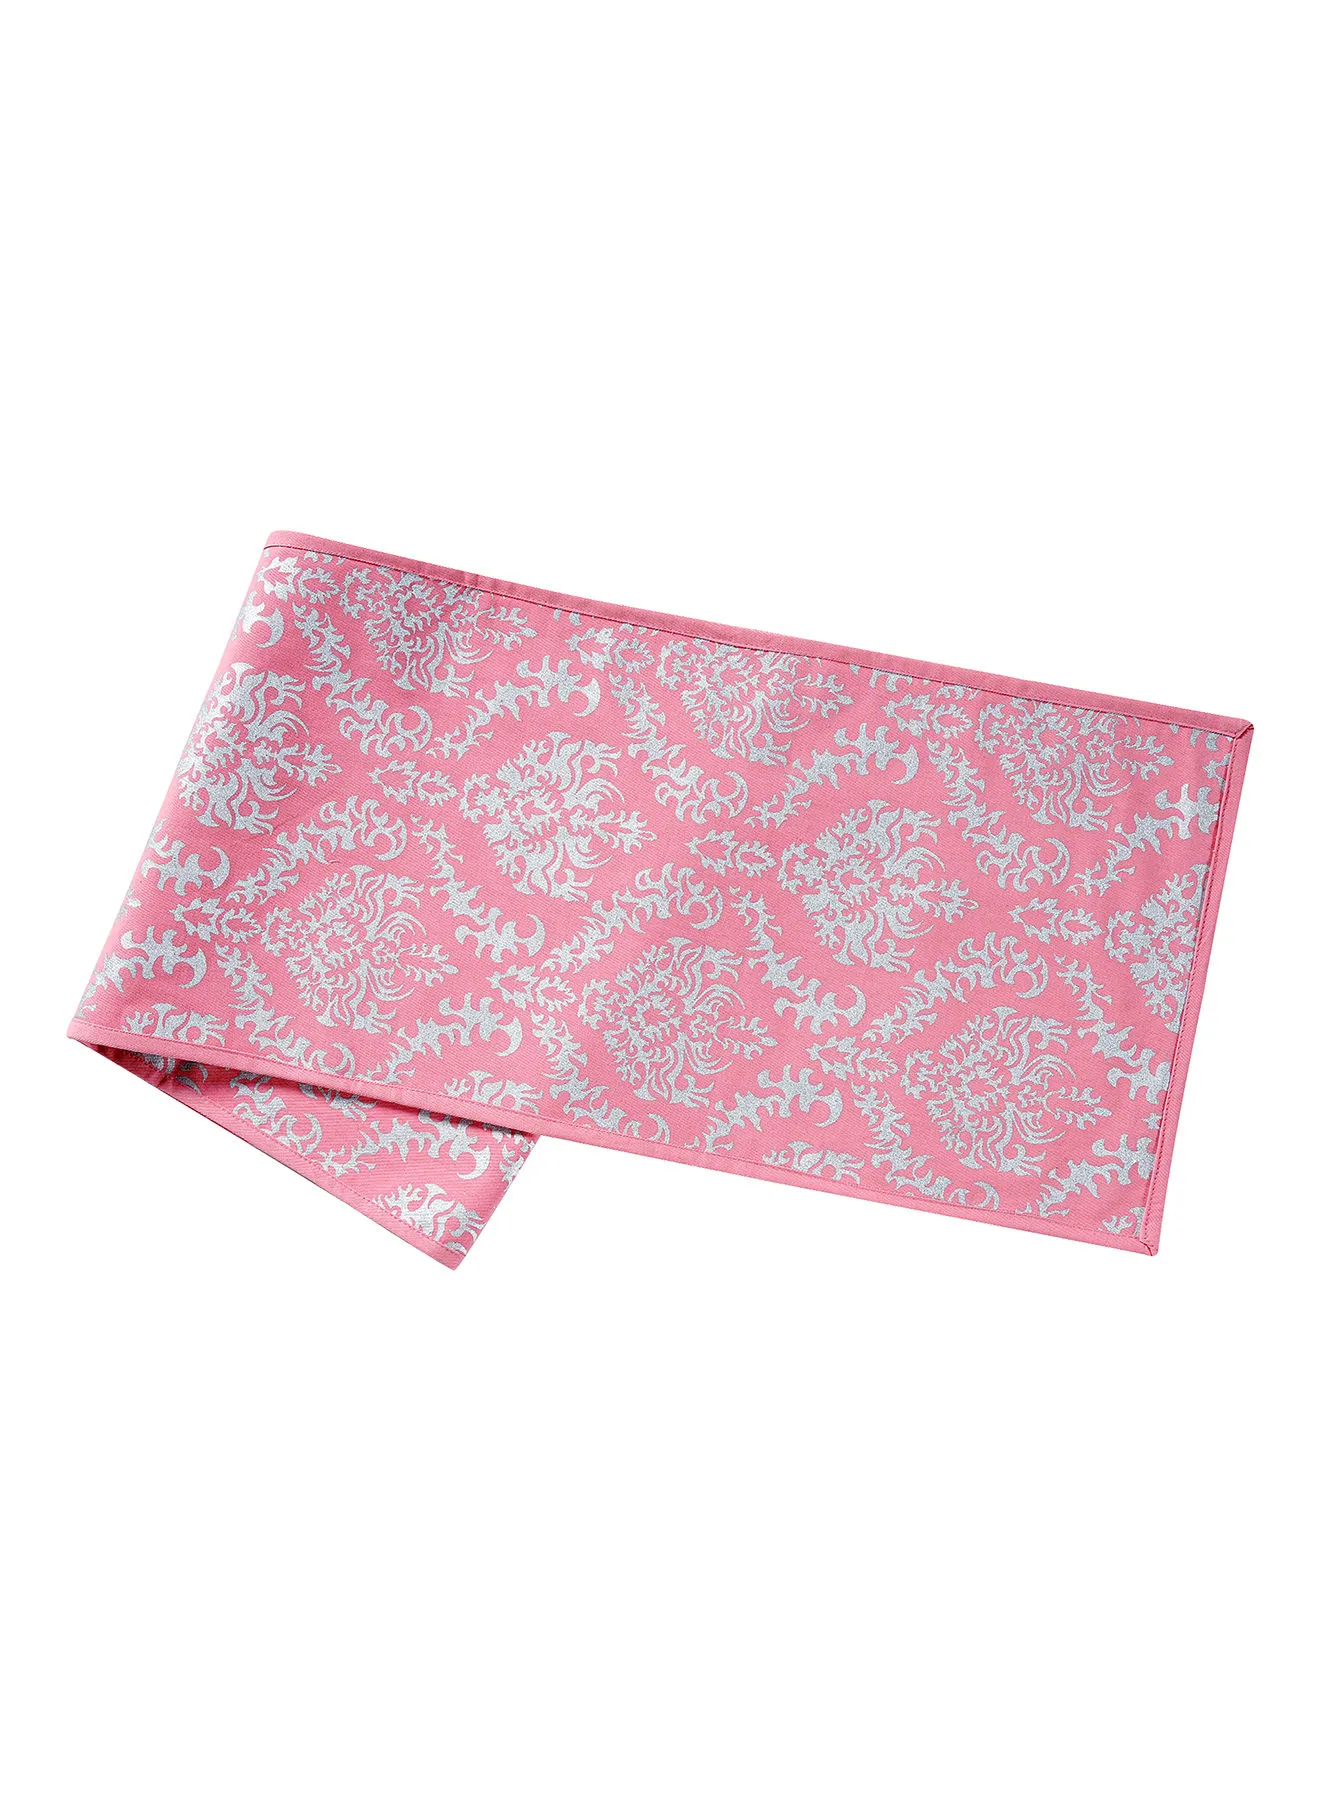 Amal Cotton Table Runner For Dining Table - Printed Table Runner - Table Linen - 30 X 180 Cm - Silver/Pink